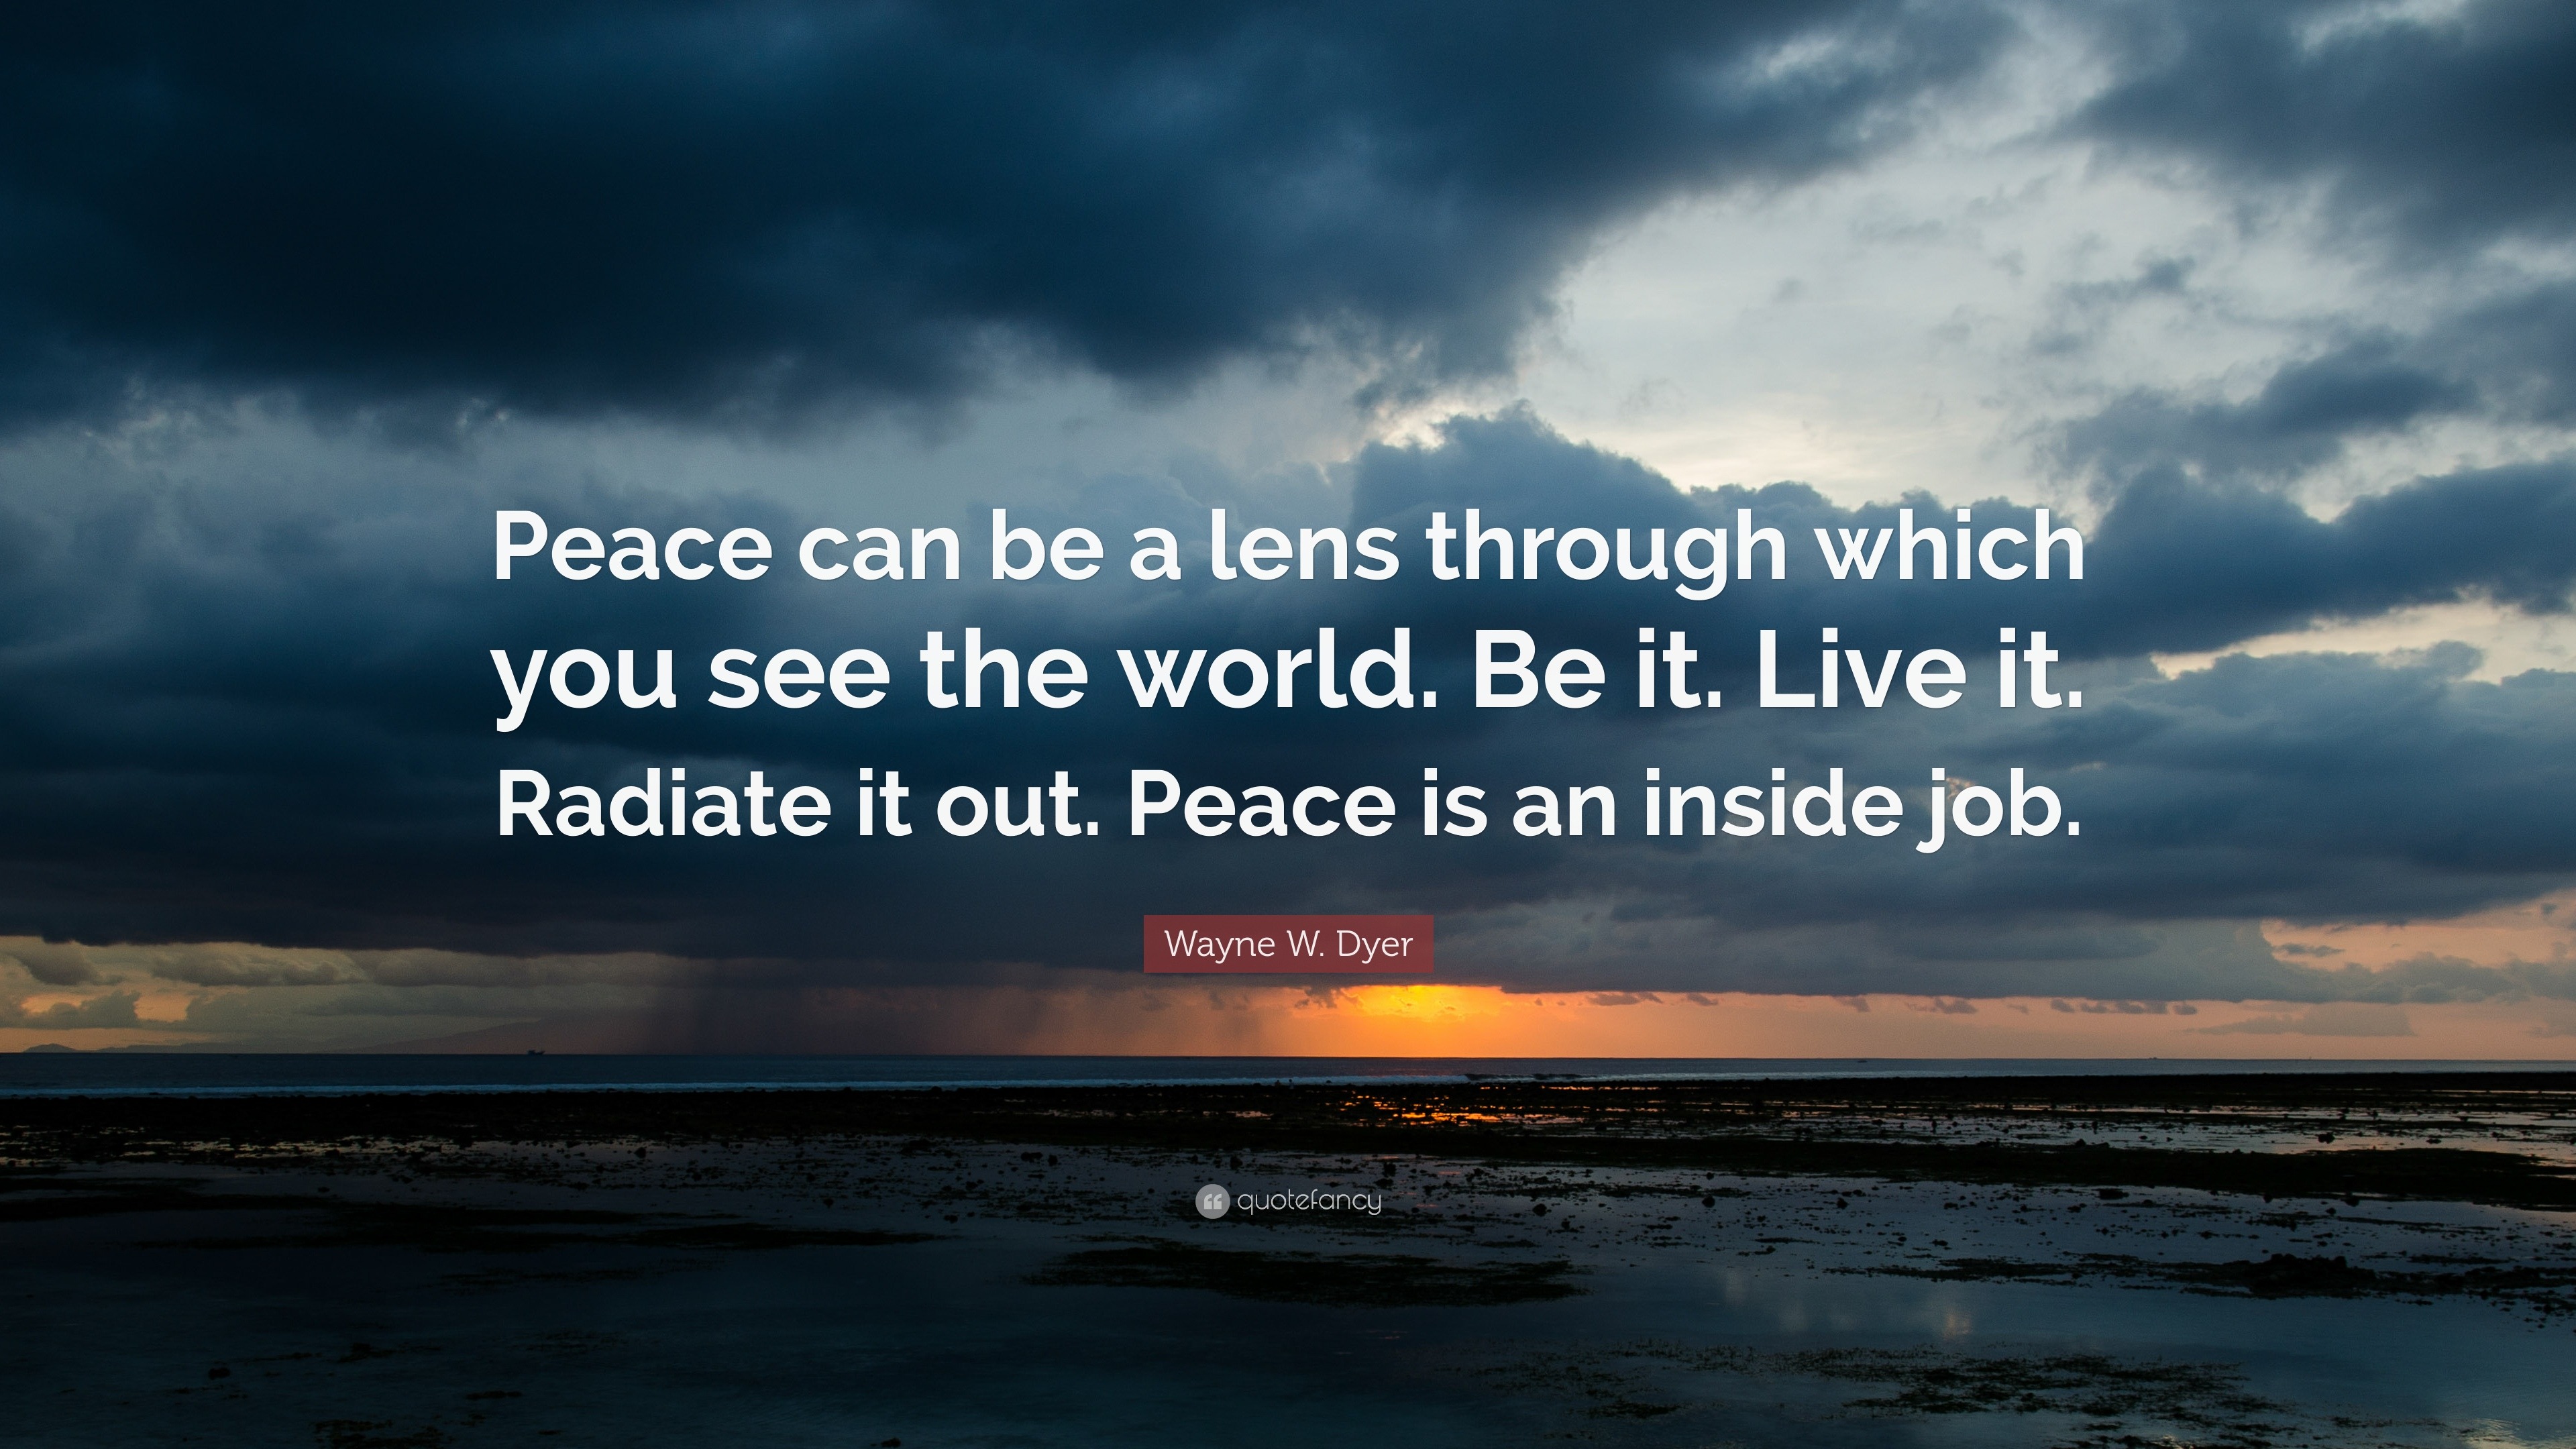 Wayne W. Dyer Quote: “Peace can be a lens through which you see the world. Be